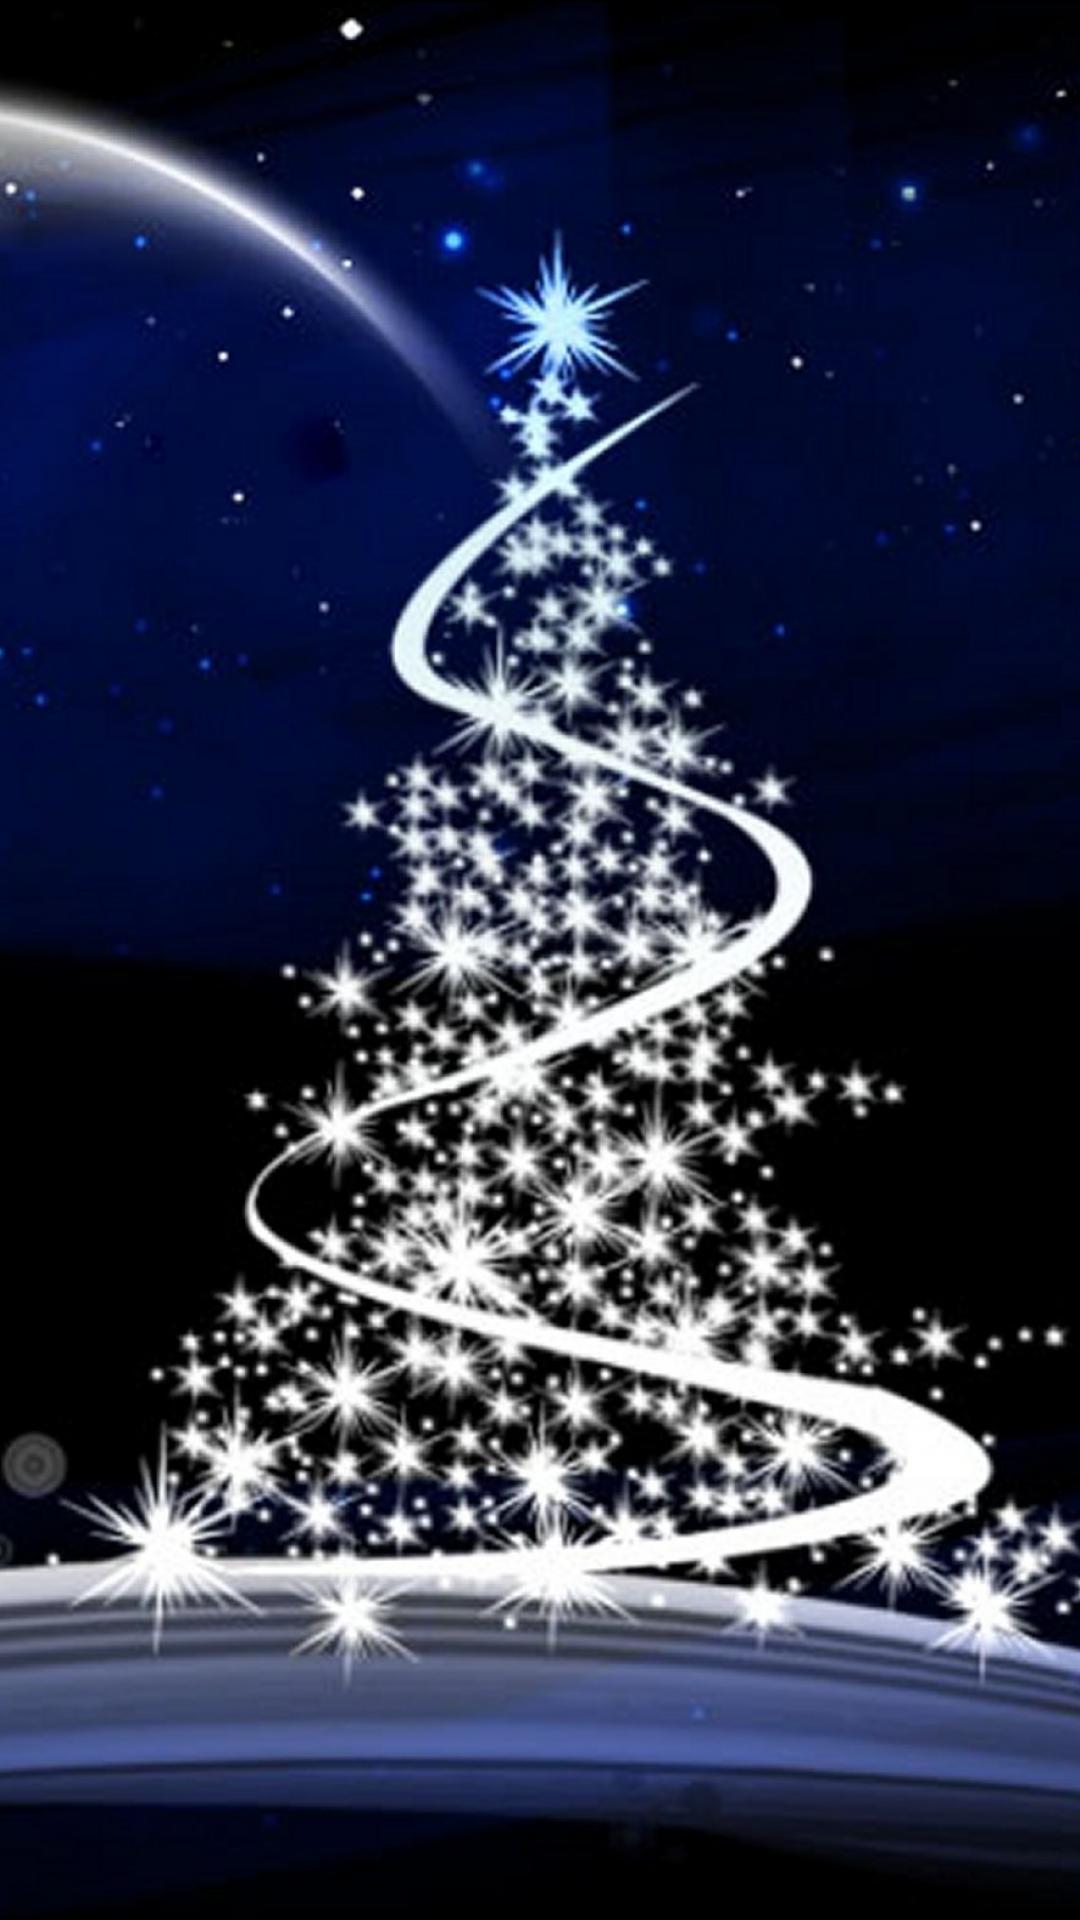 1000+ Christmas HD Wallpapers - for Android - APK Download